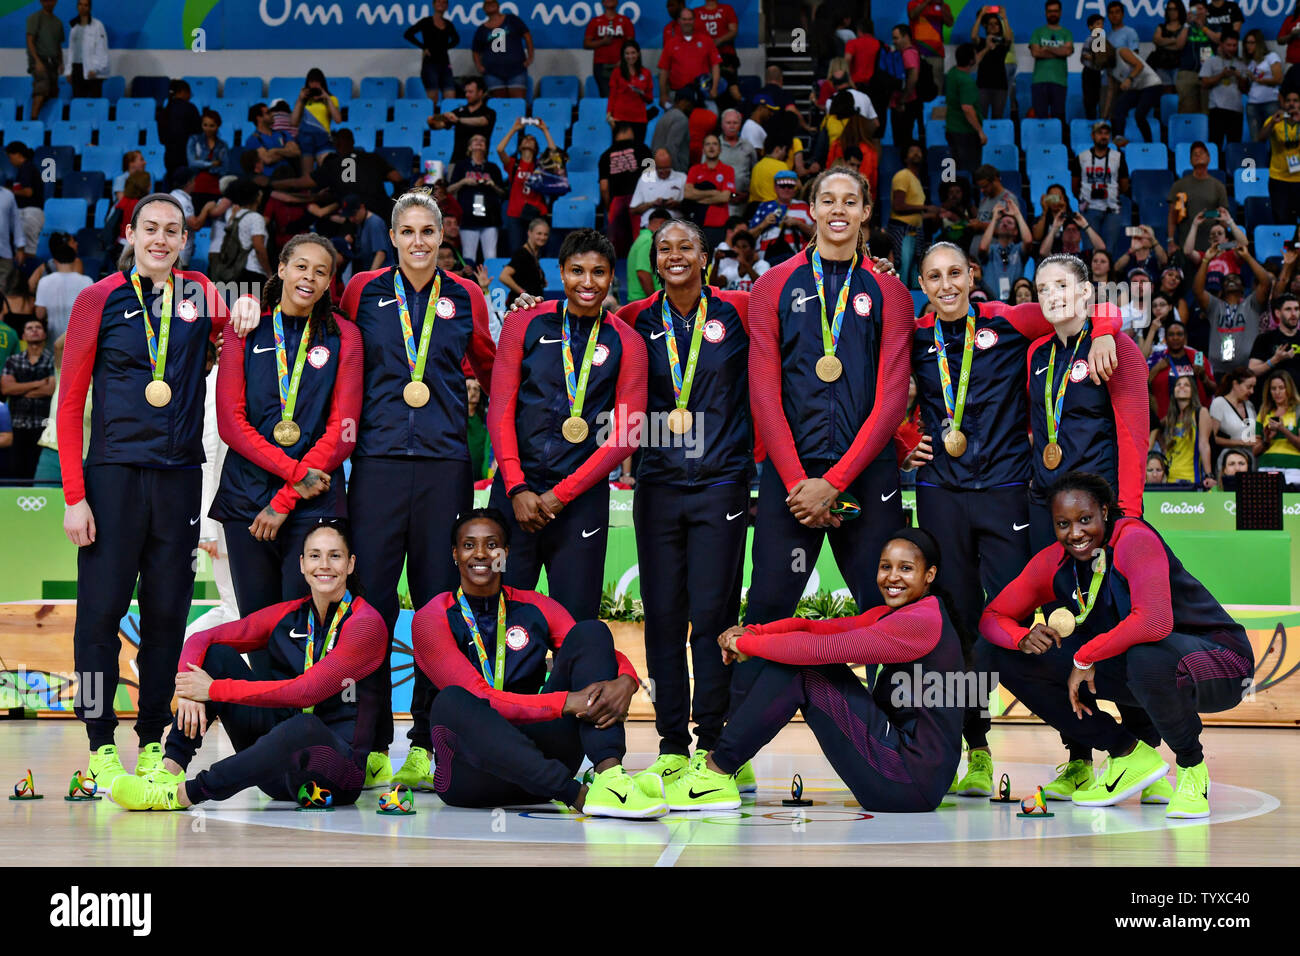 Members Of The United States Women S Basketball Team Pose With Their Gold Medals After Winning The Women S Basketball Gold Medal Game In The Carioca Arena 1 At The 16 Rio Summer Olympics